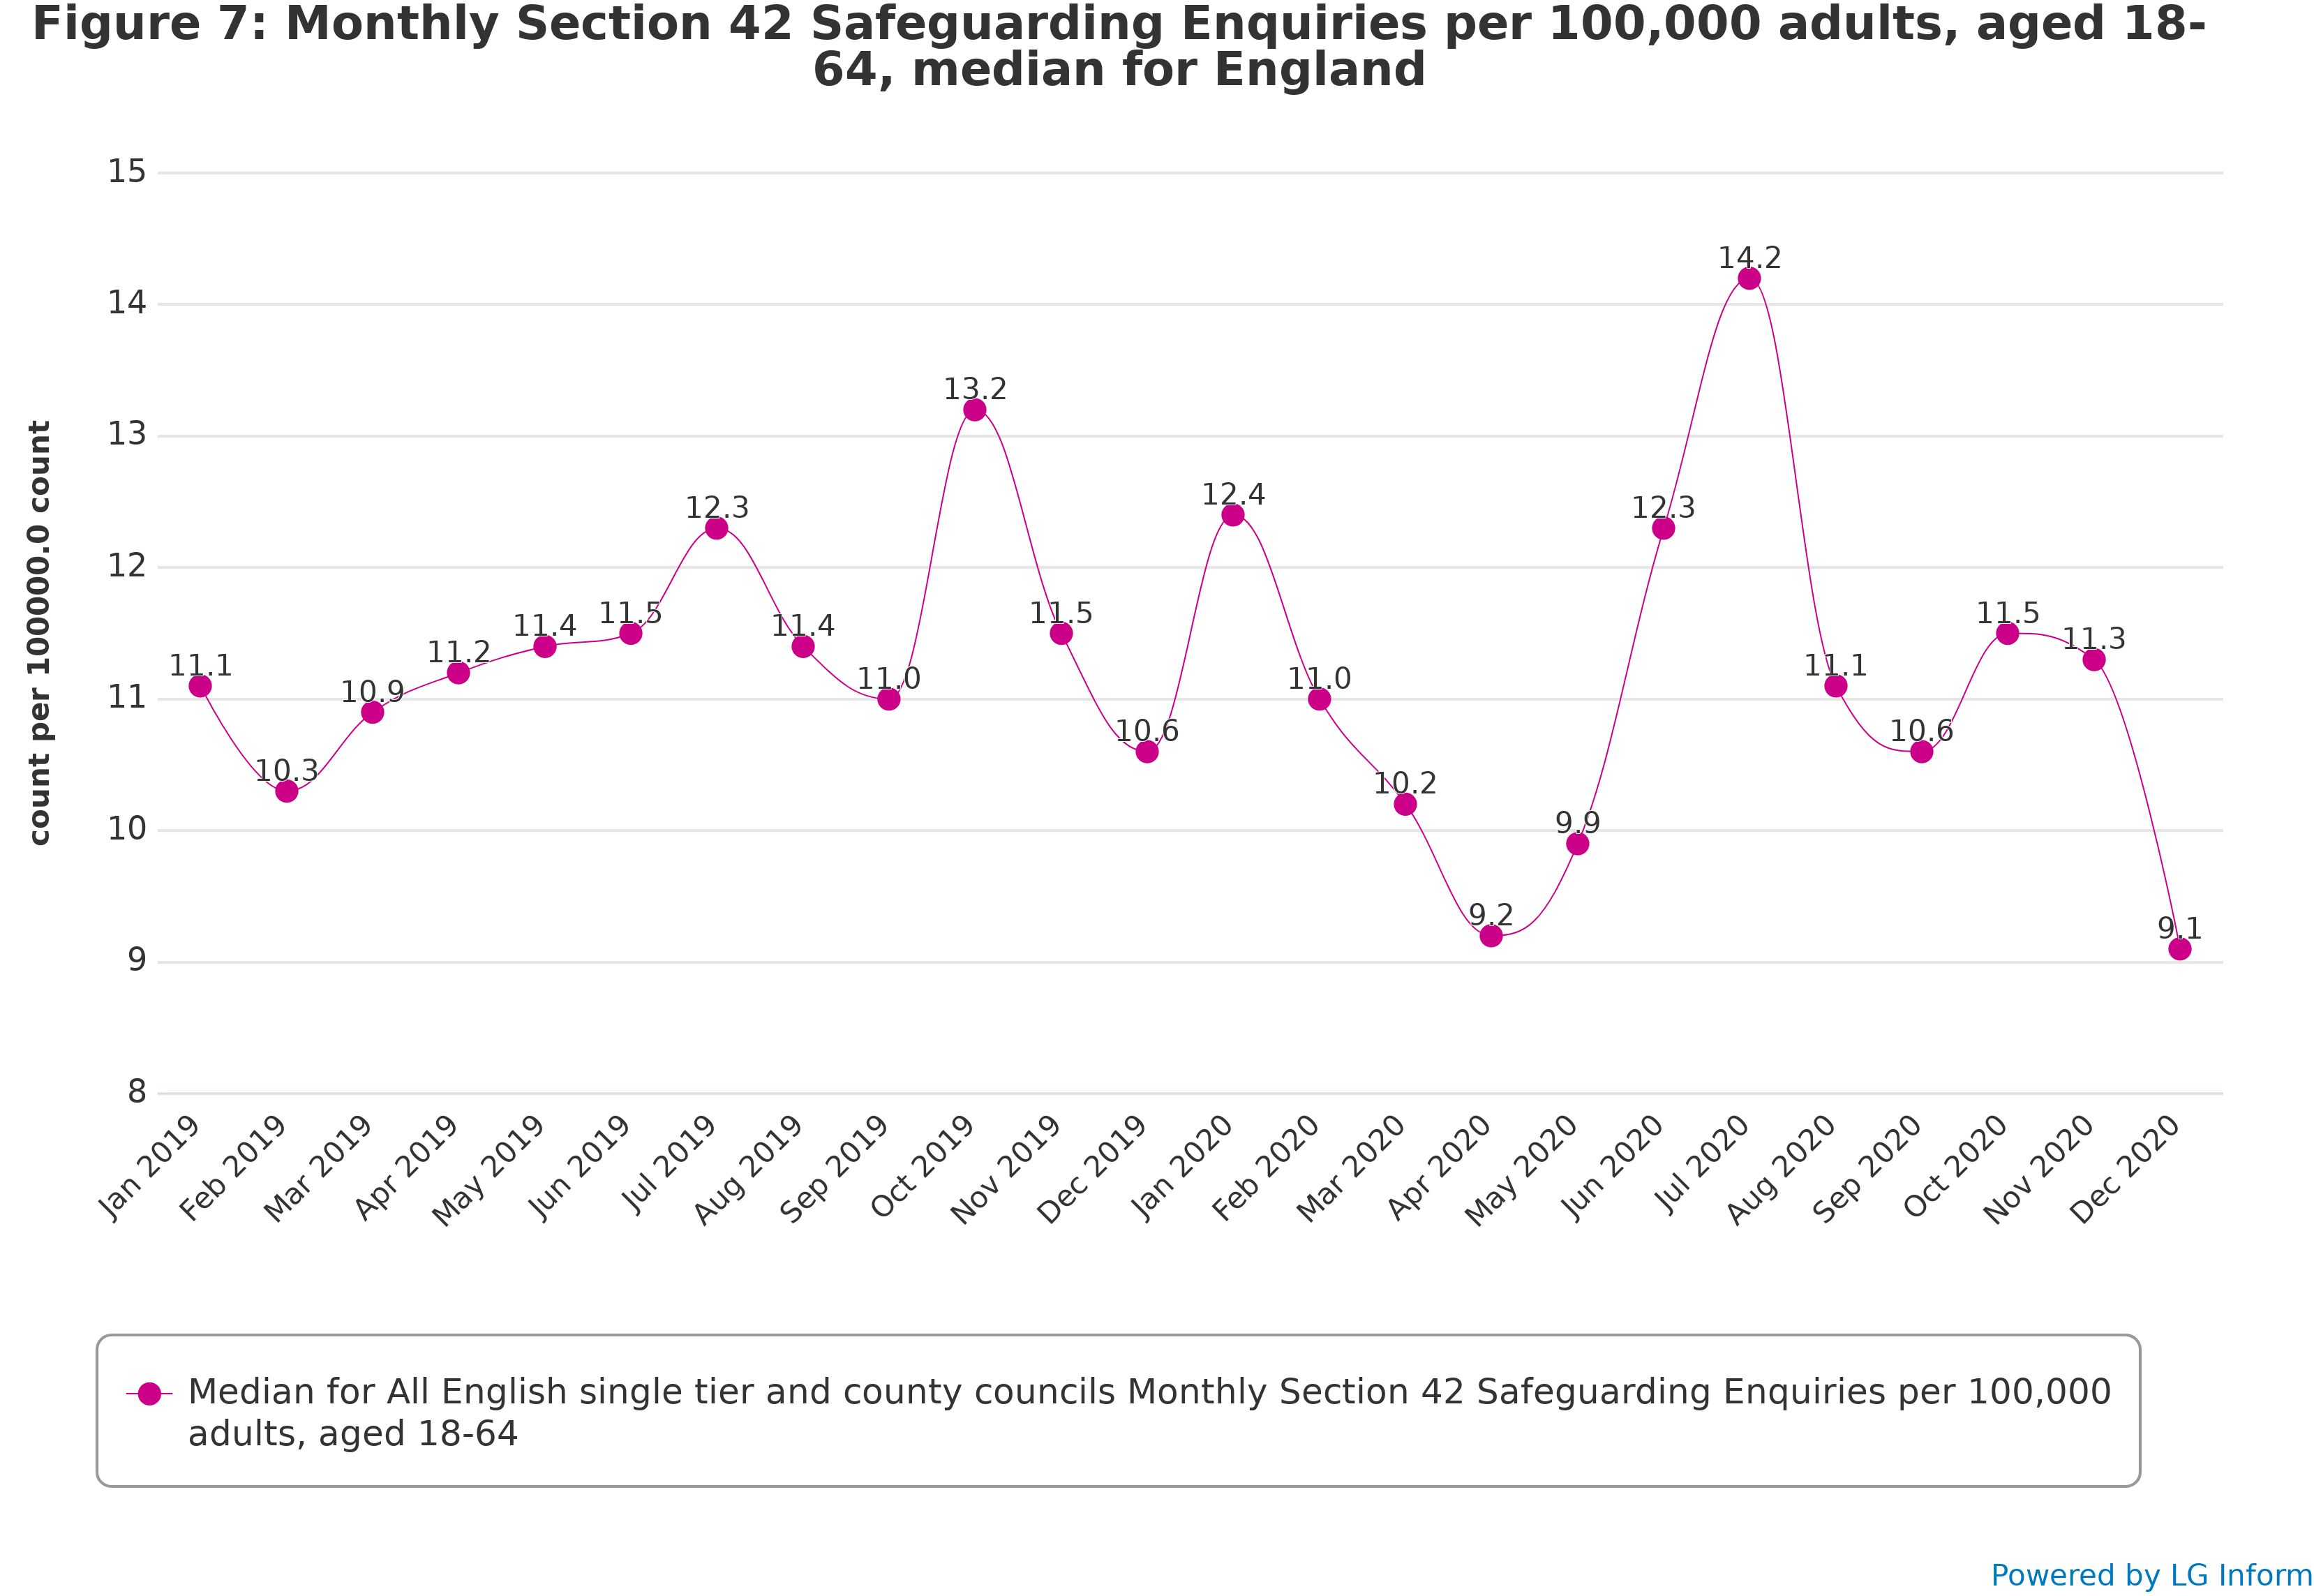 Figure 7: Monthly Section 42 Safeguarding Enquiries per 100,000 adults, aged 18-64, median for England